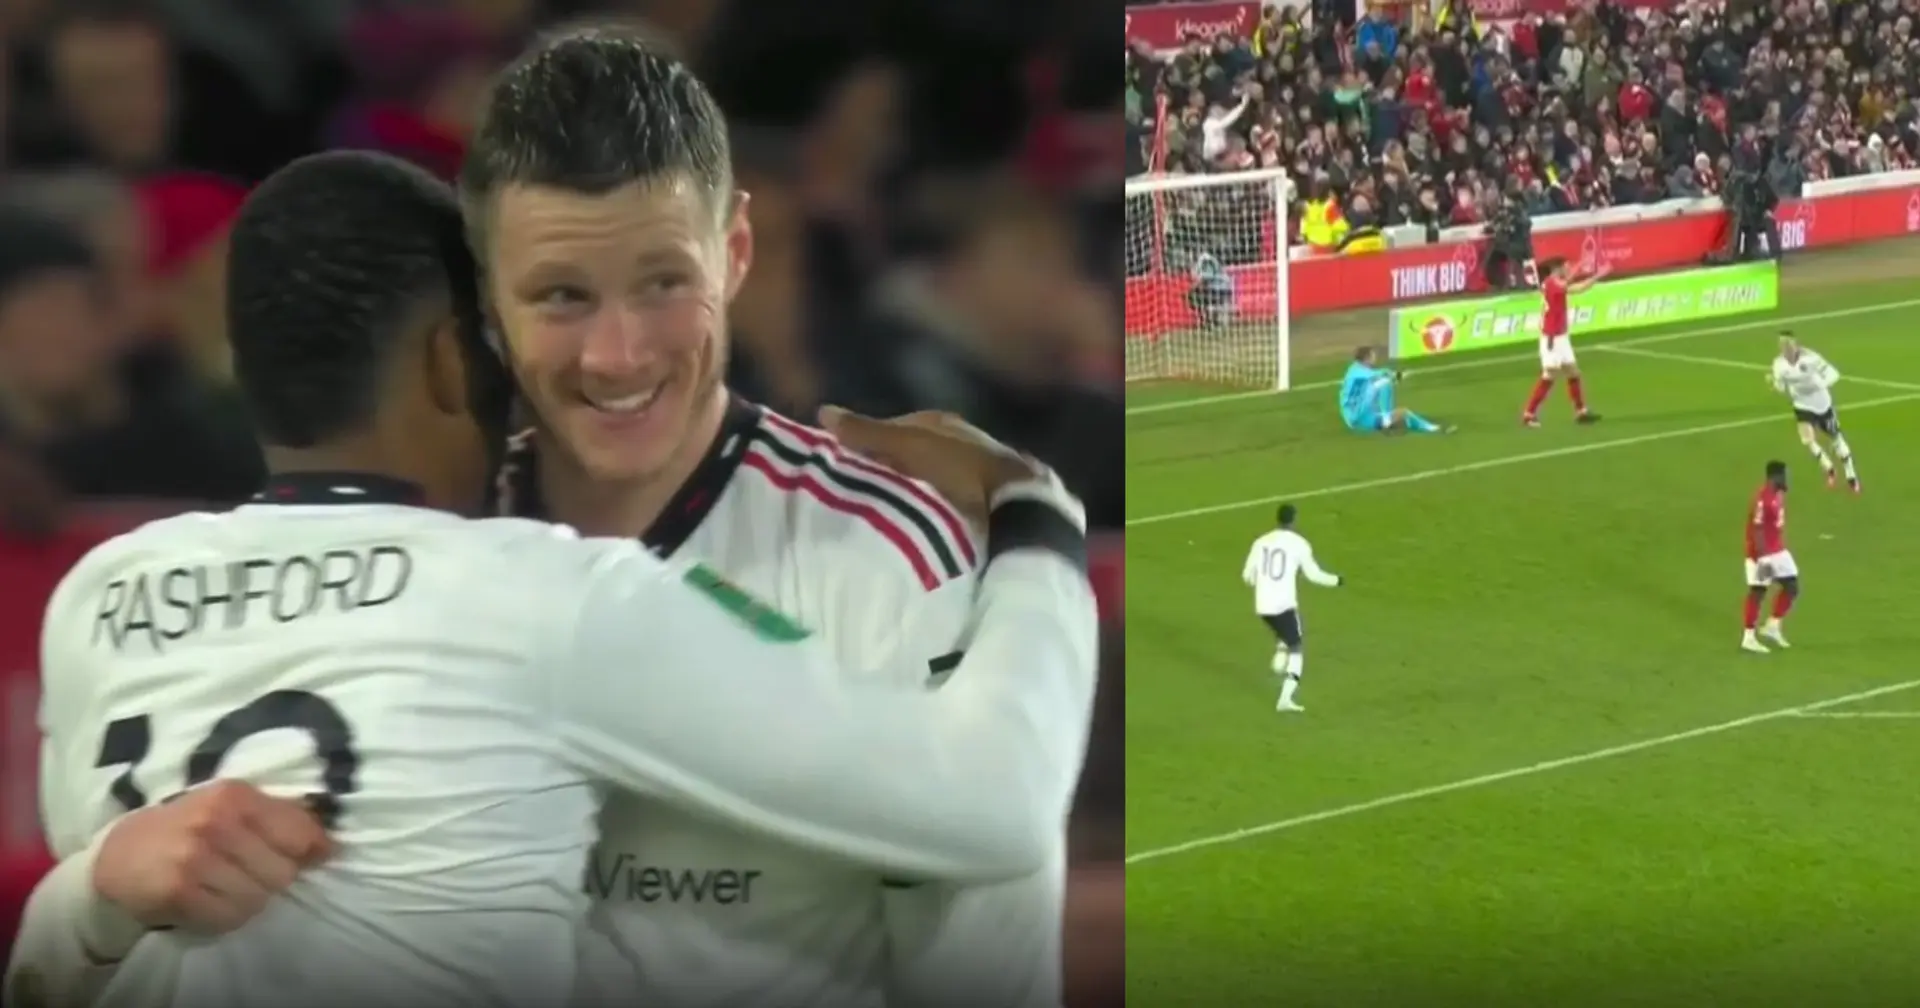 Wout Weghorst kisses Tyrell Malacia's head while celebrating debut Man United goal — spotted